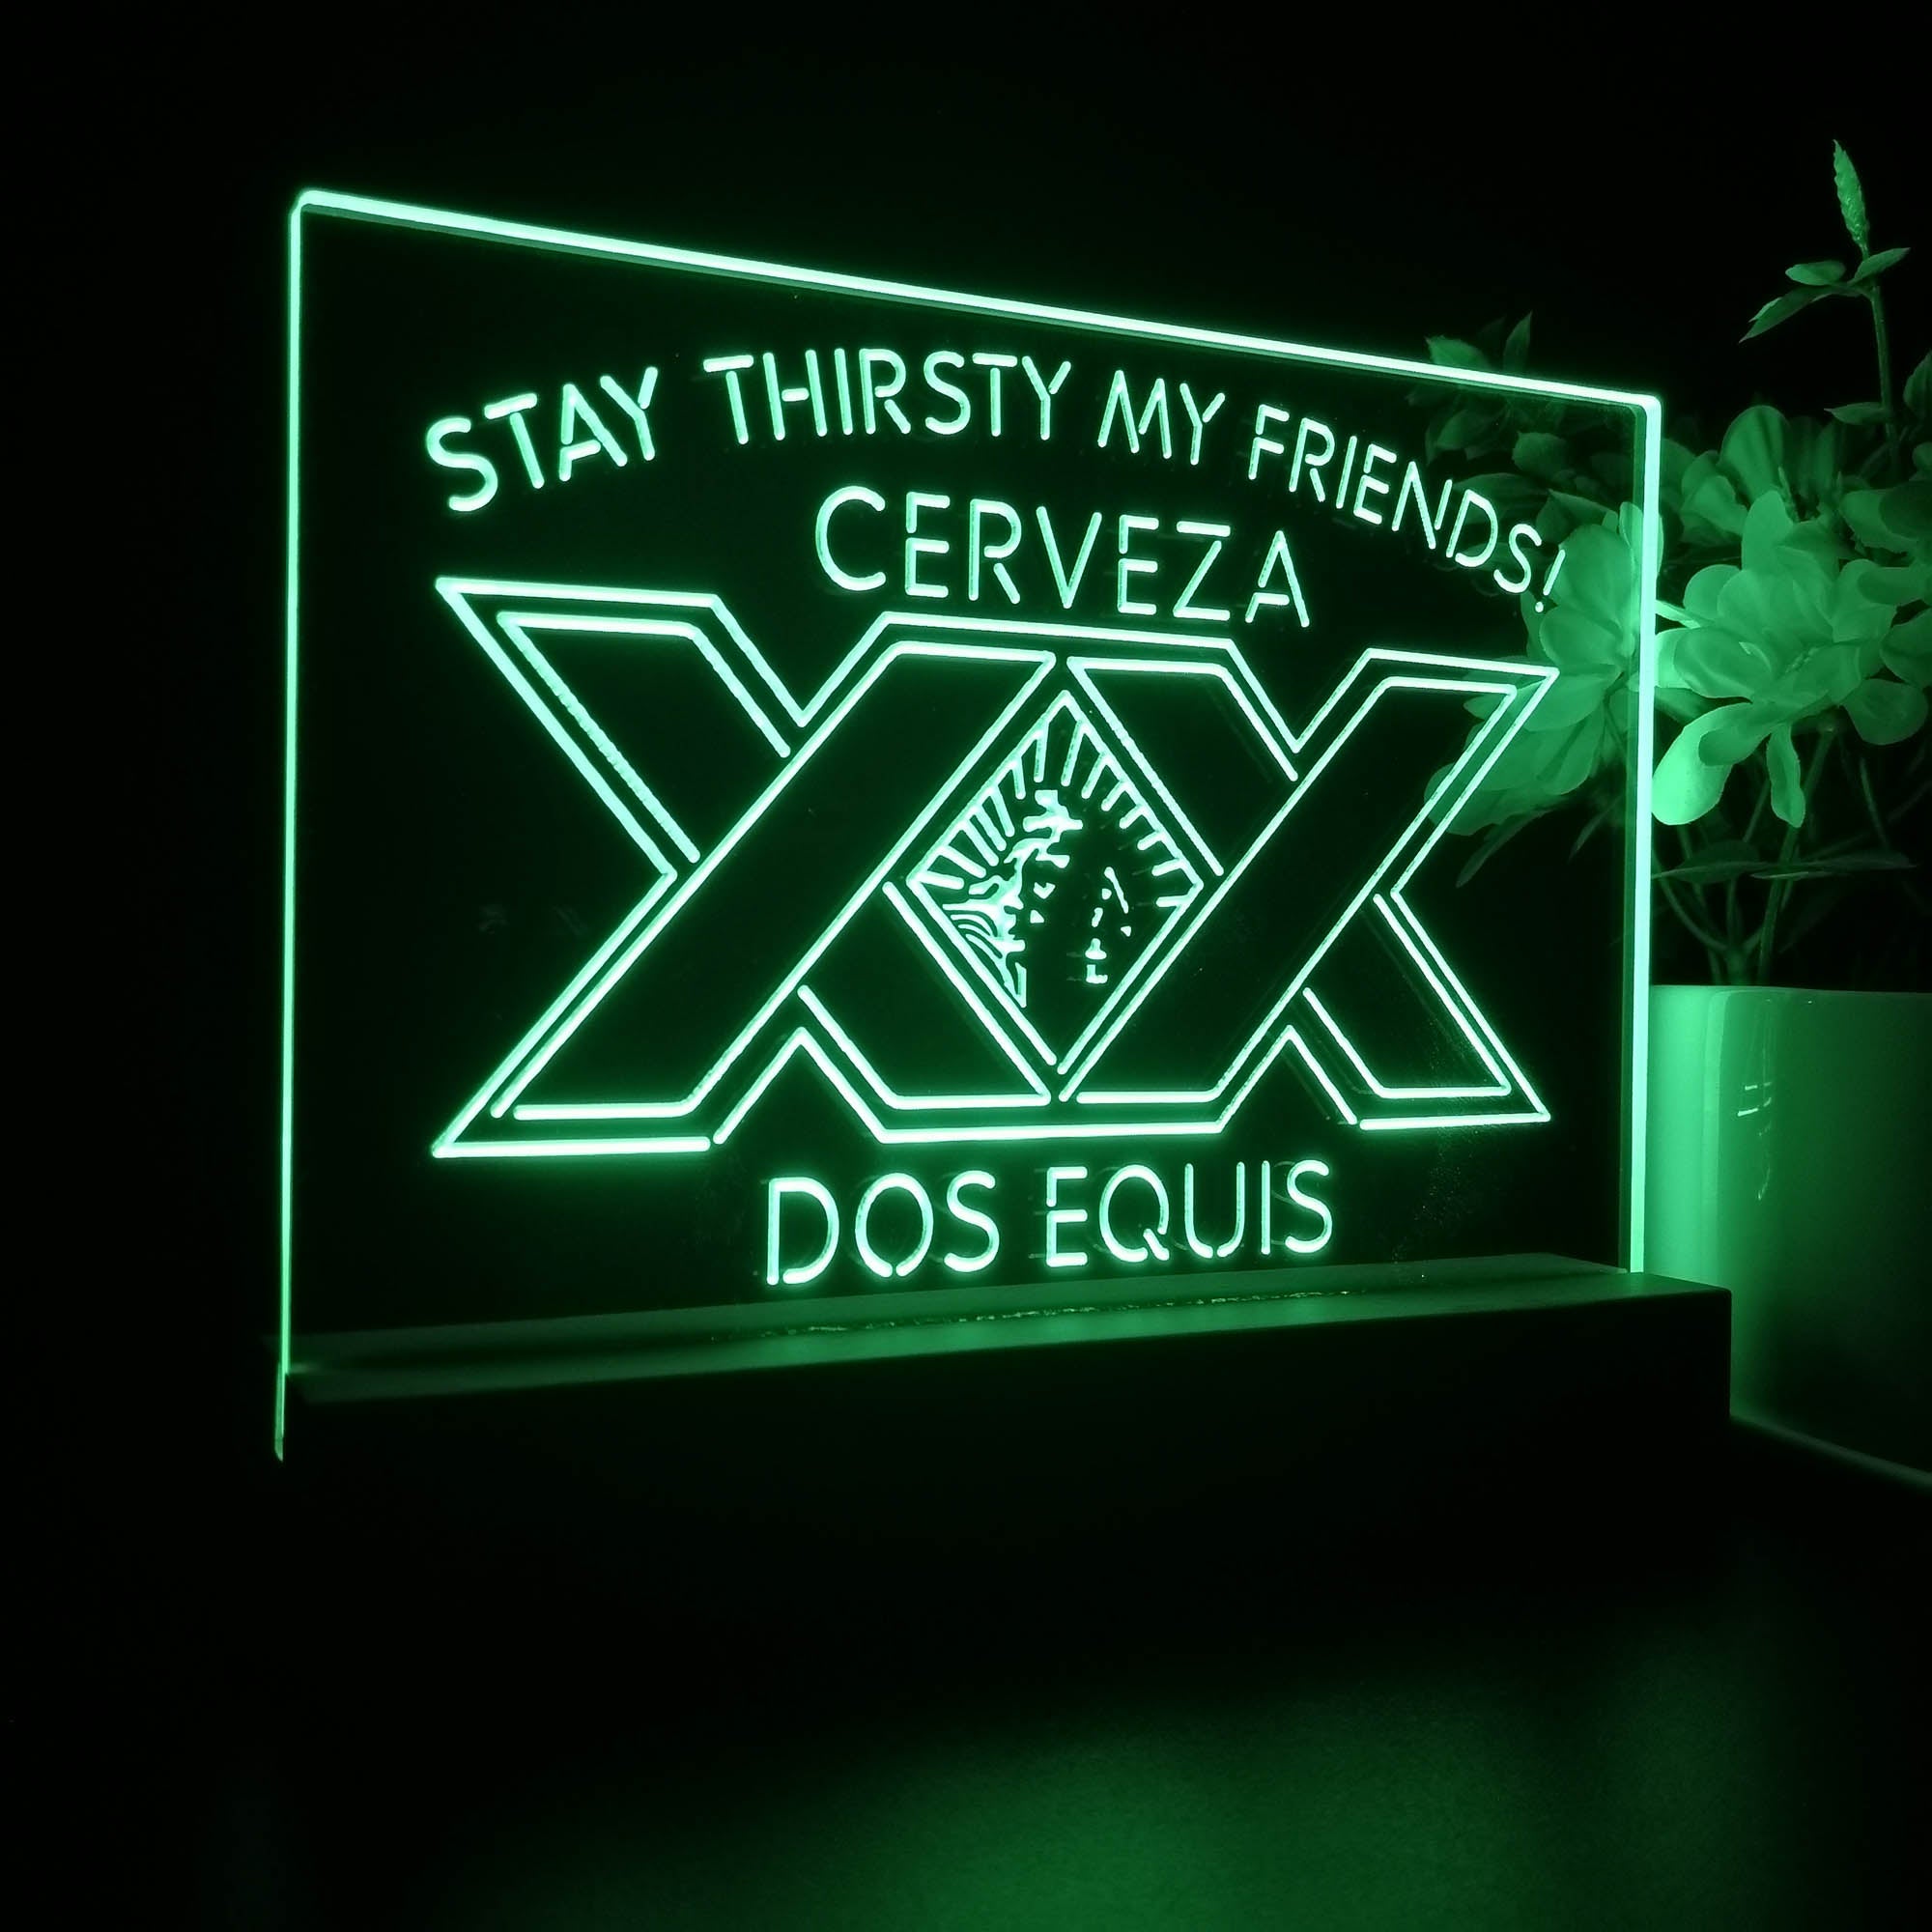 XXs Doss Equiss Stay Thirsty My Friends Night Light LED Sign